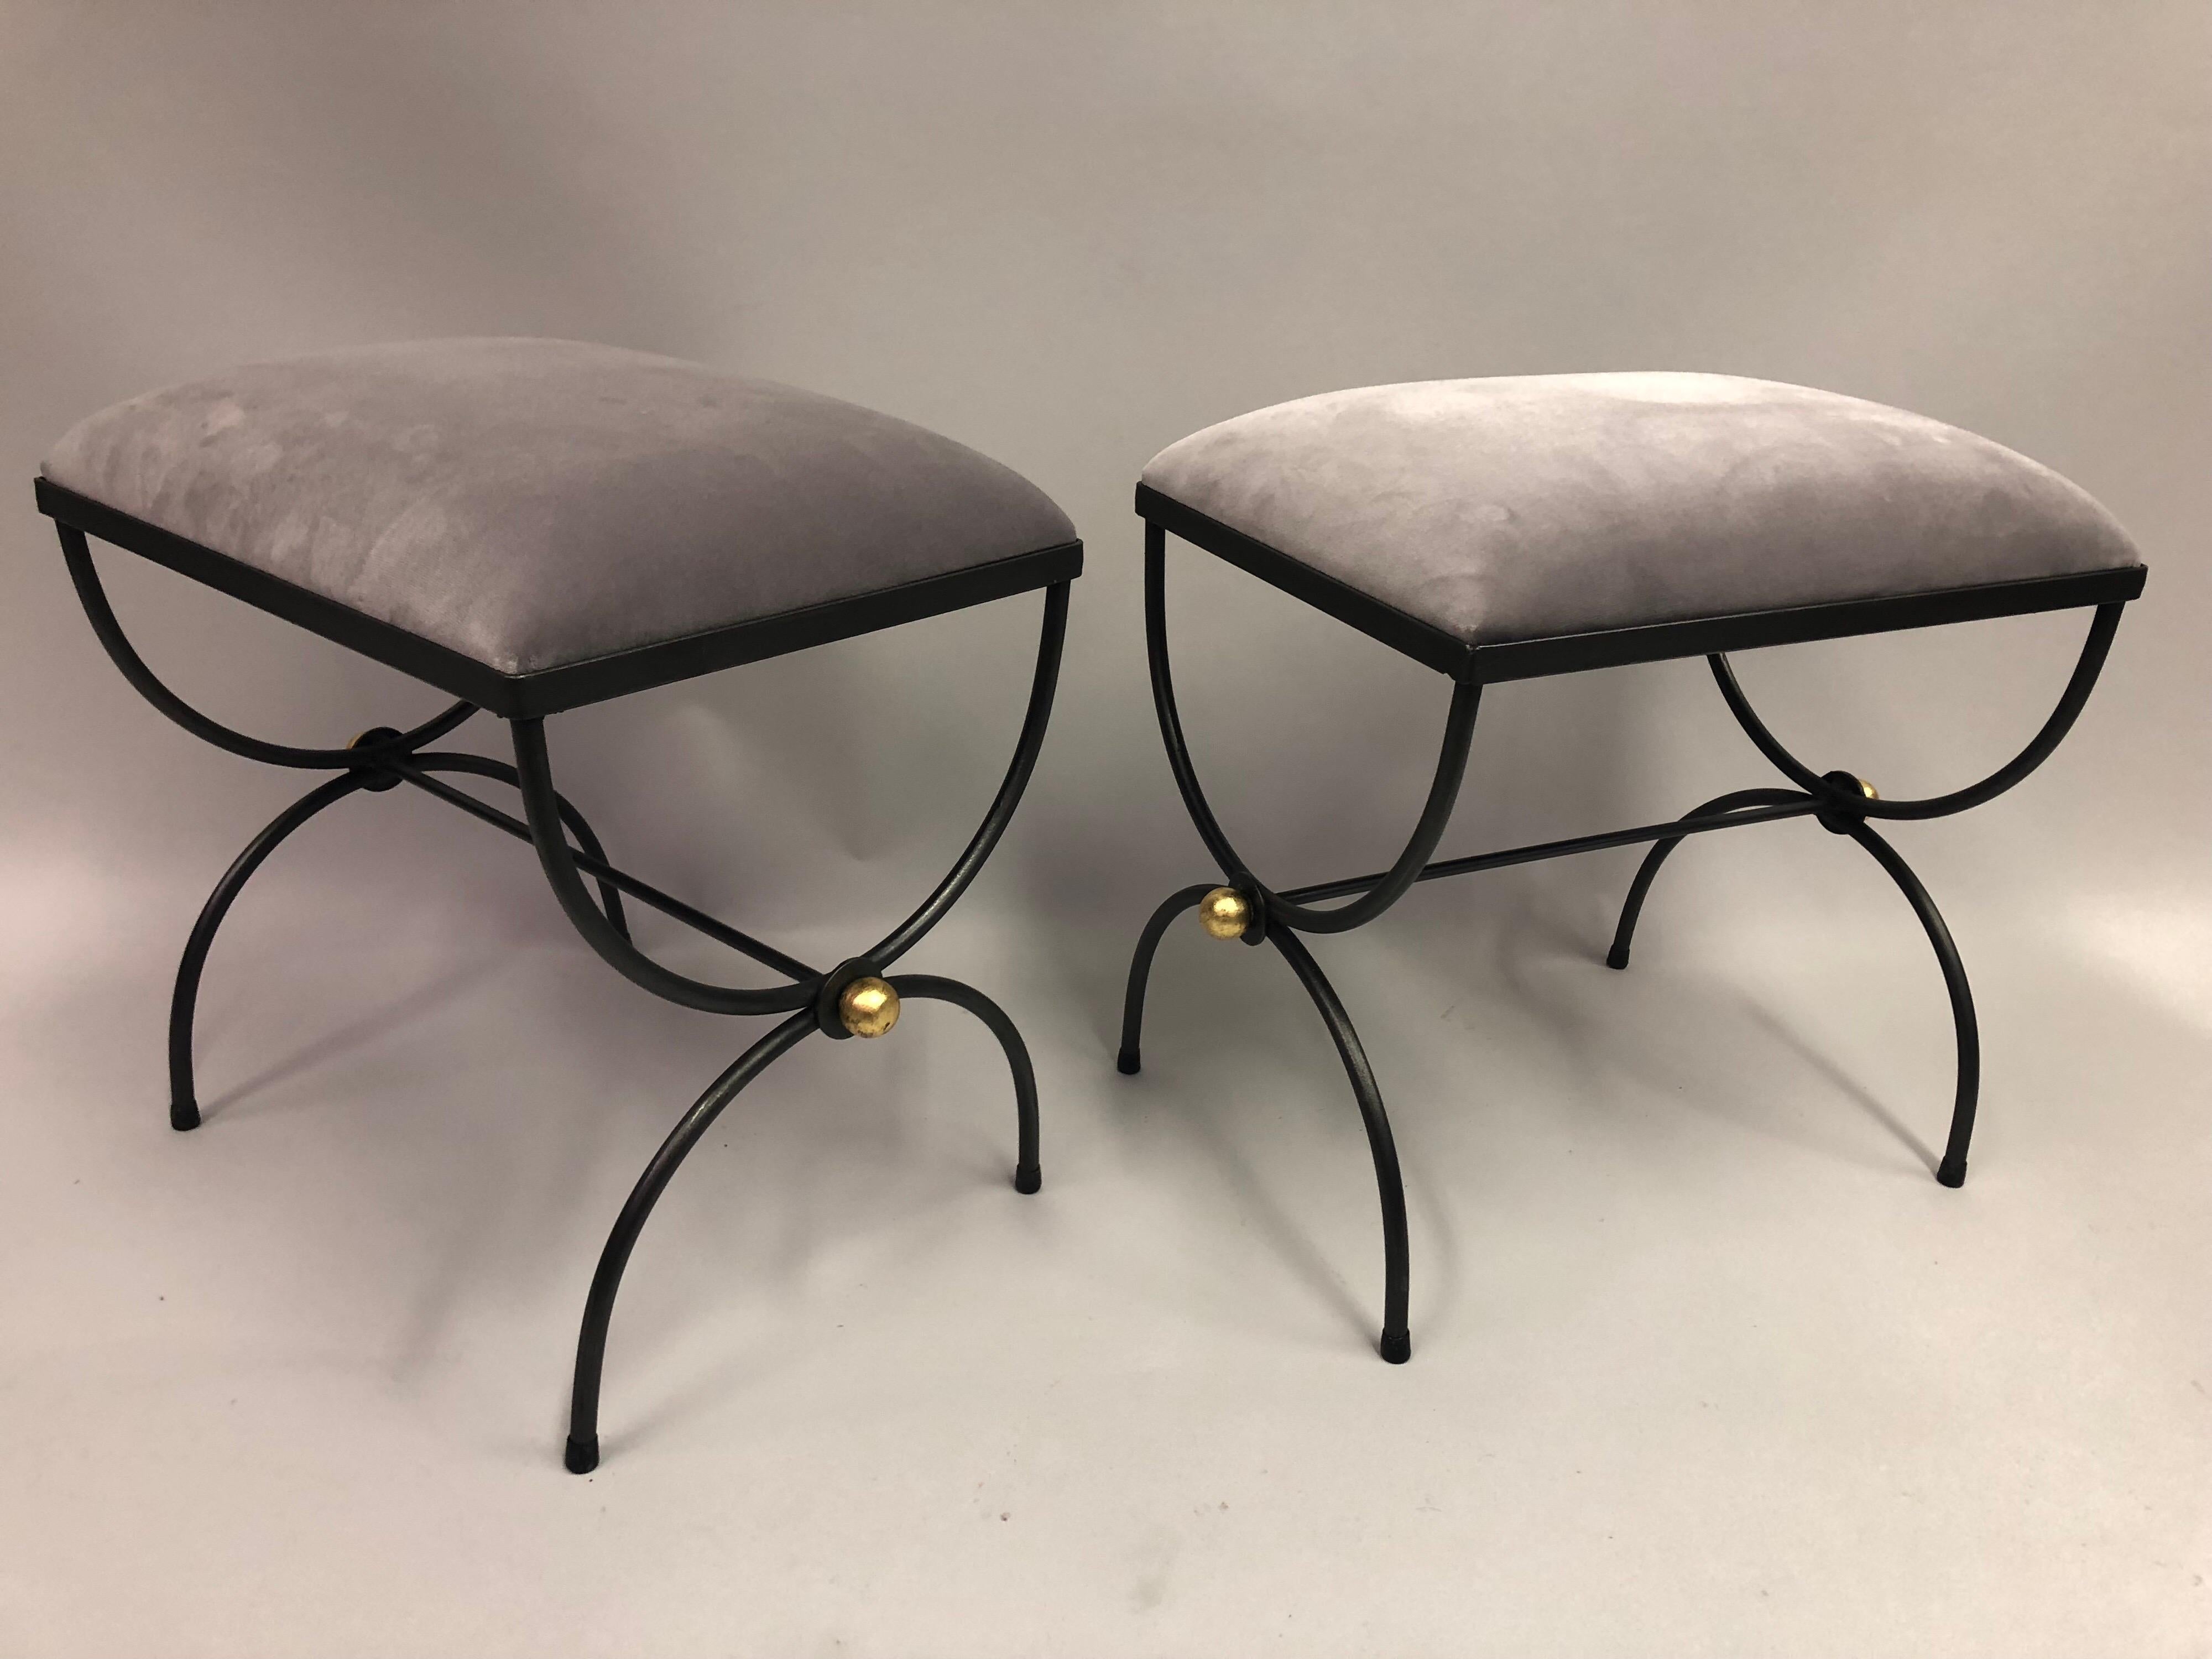 Elegant and timeless pair of French Mid-Century Modern neoclassical handwrought iron and gilt benches or stools attributed to Maison Baguès. The pieces are in a Classic Curile / X-Frame Design and finished with gilt iron ball finials at the